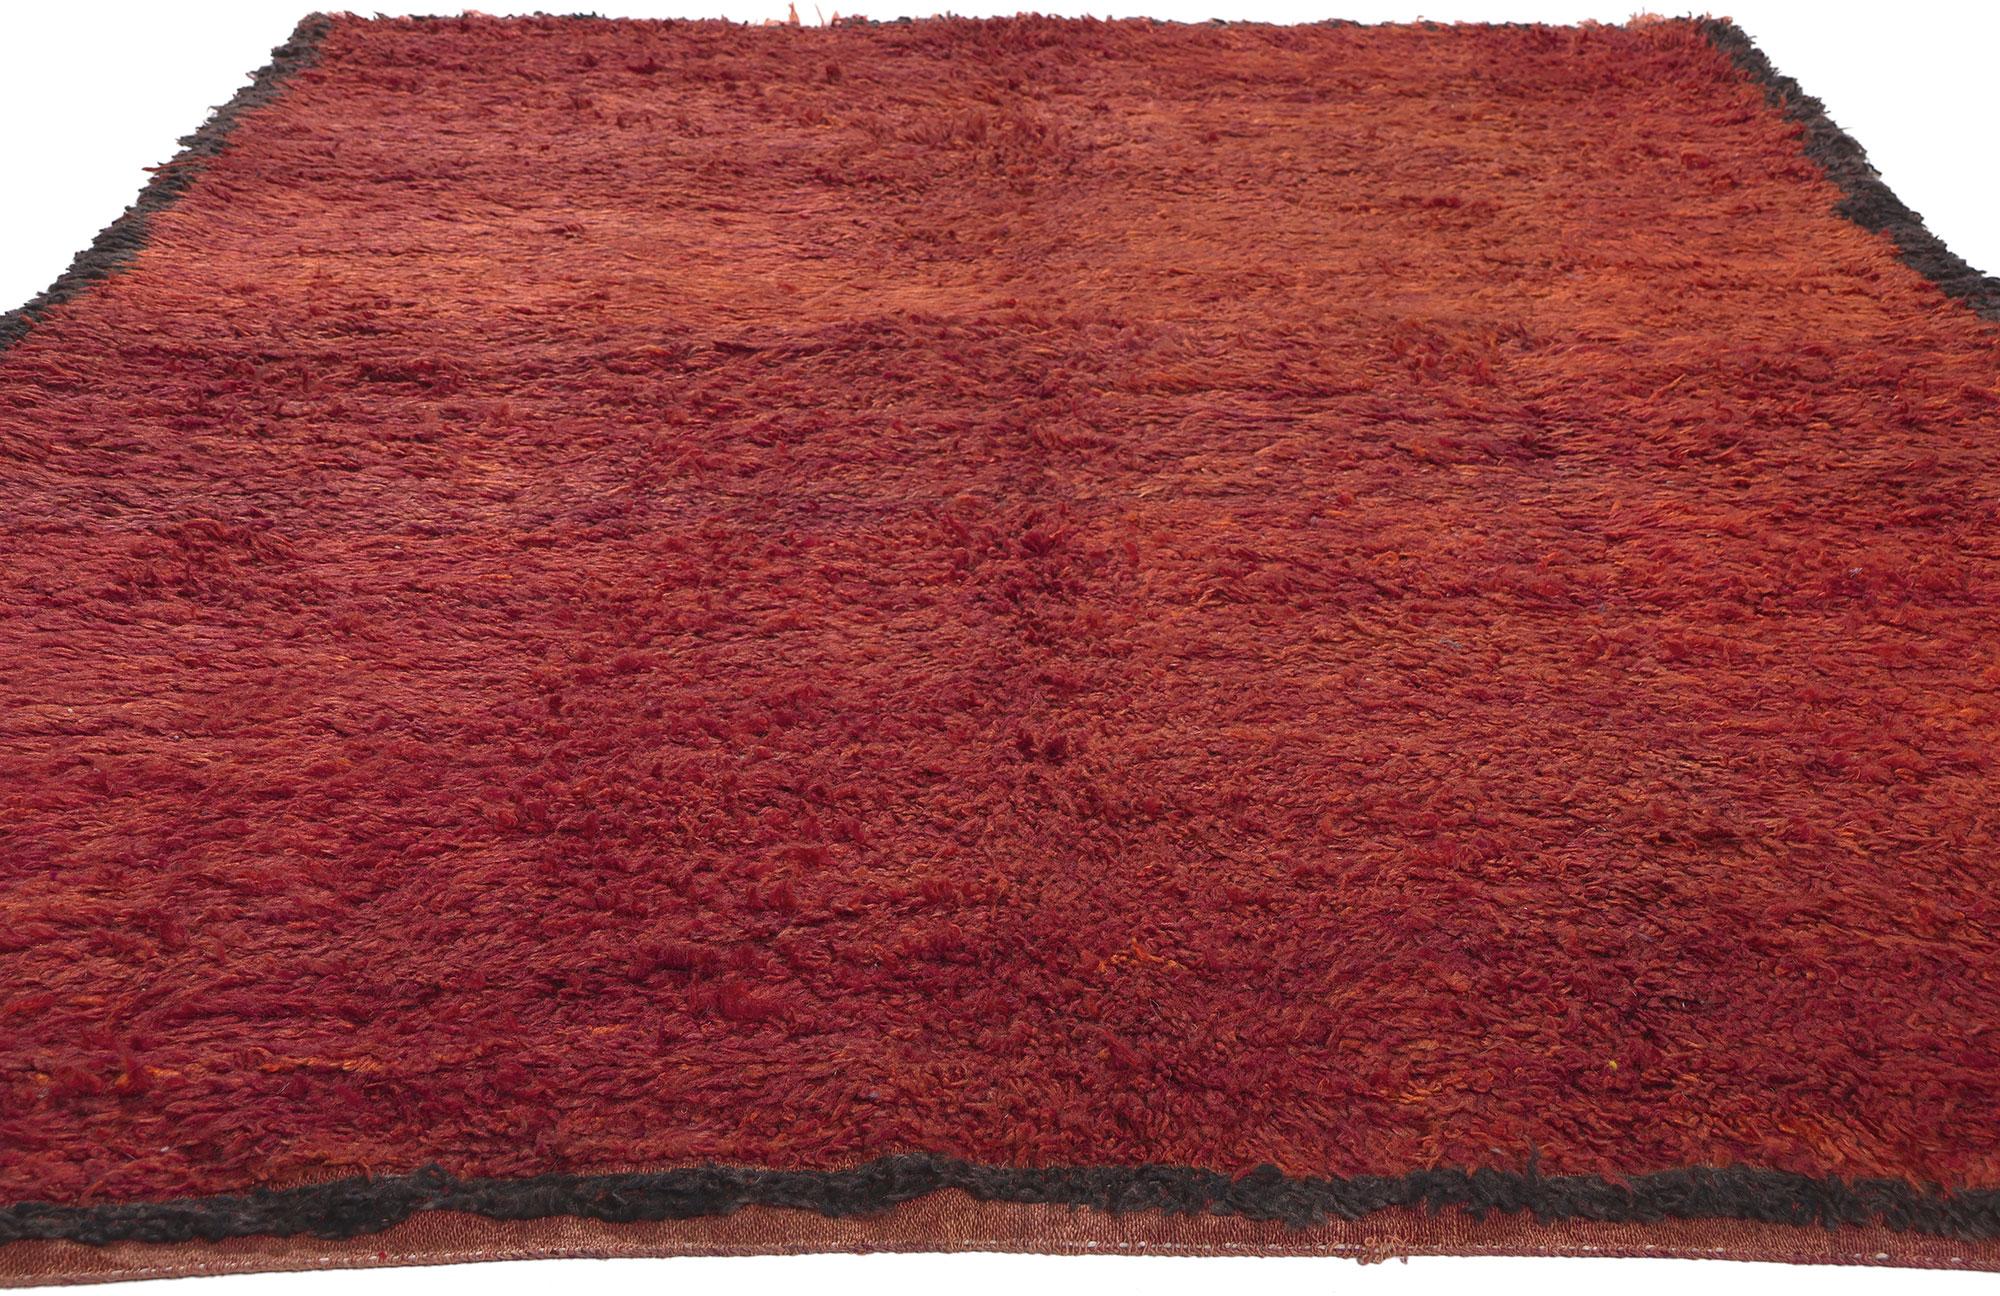 Mid-Century Modern Vintage Red Beni Mrirt Moroccan Rug, Cozy Nomad Meets Abstract Expressionism For Sale